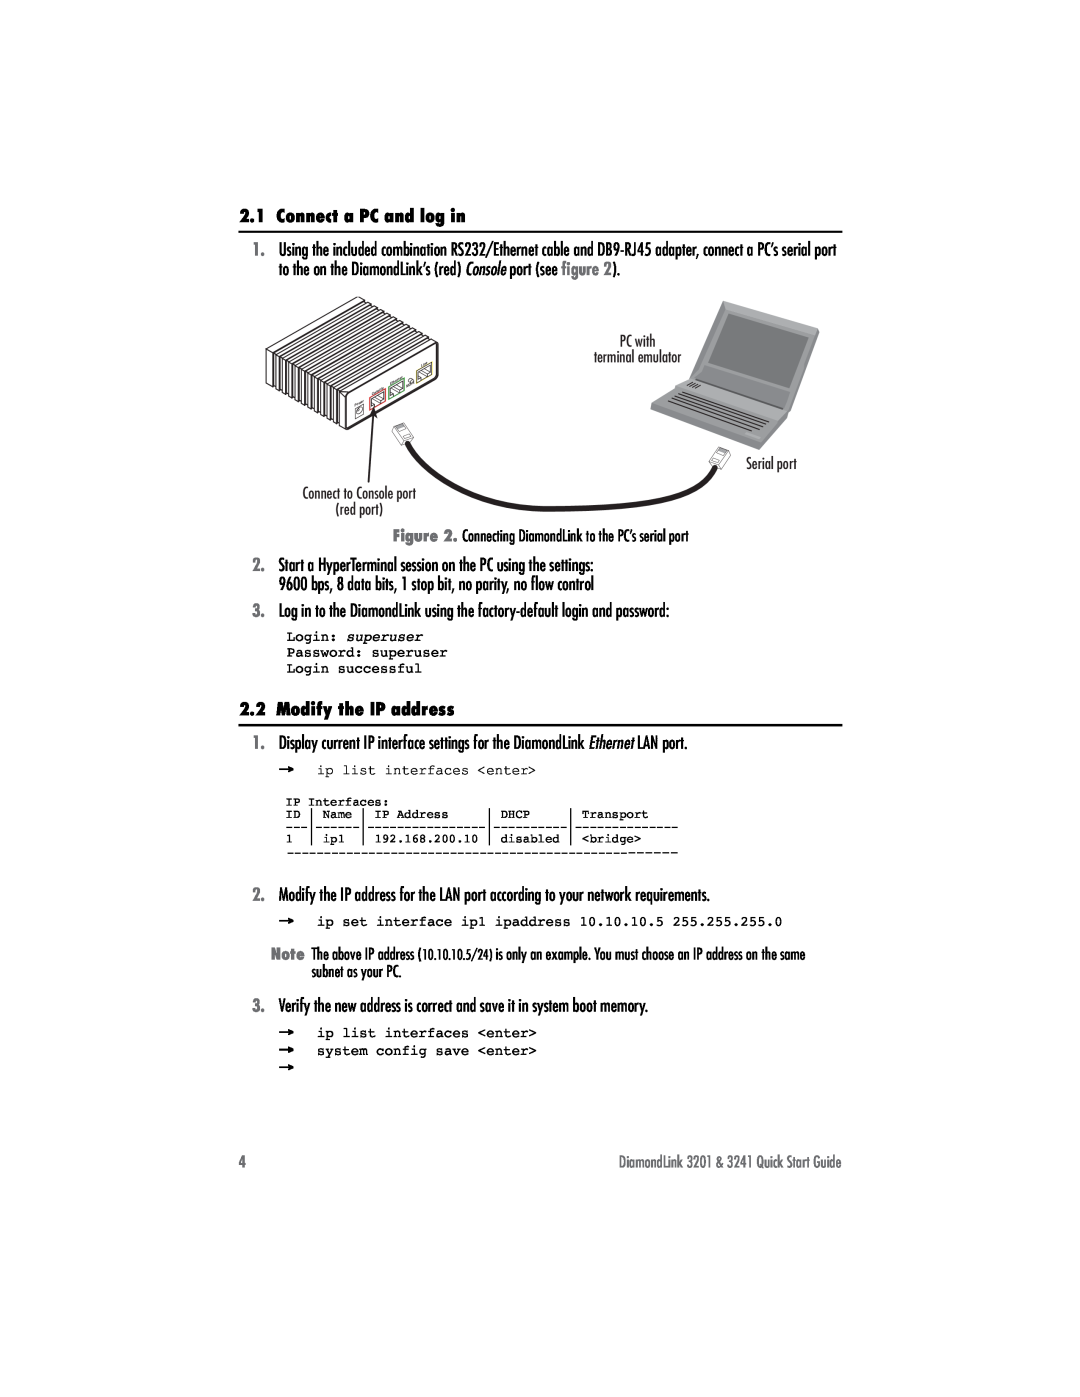 Patton electronic 3201 quick start Connect a PC and log in, Modify the IP address 